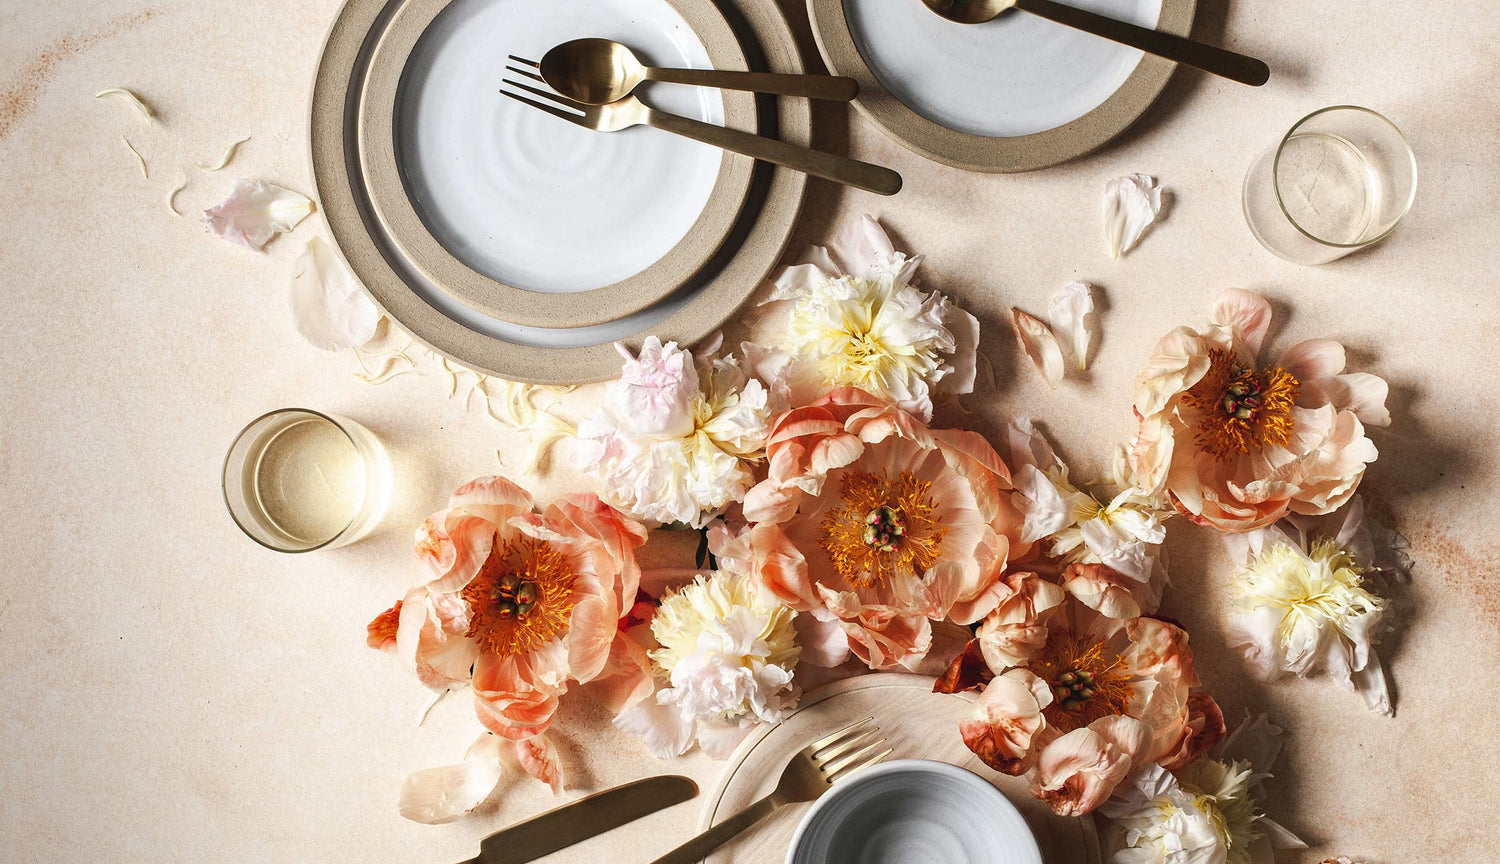 Beautiful image of farmhouse pottery plates and floral tablescape